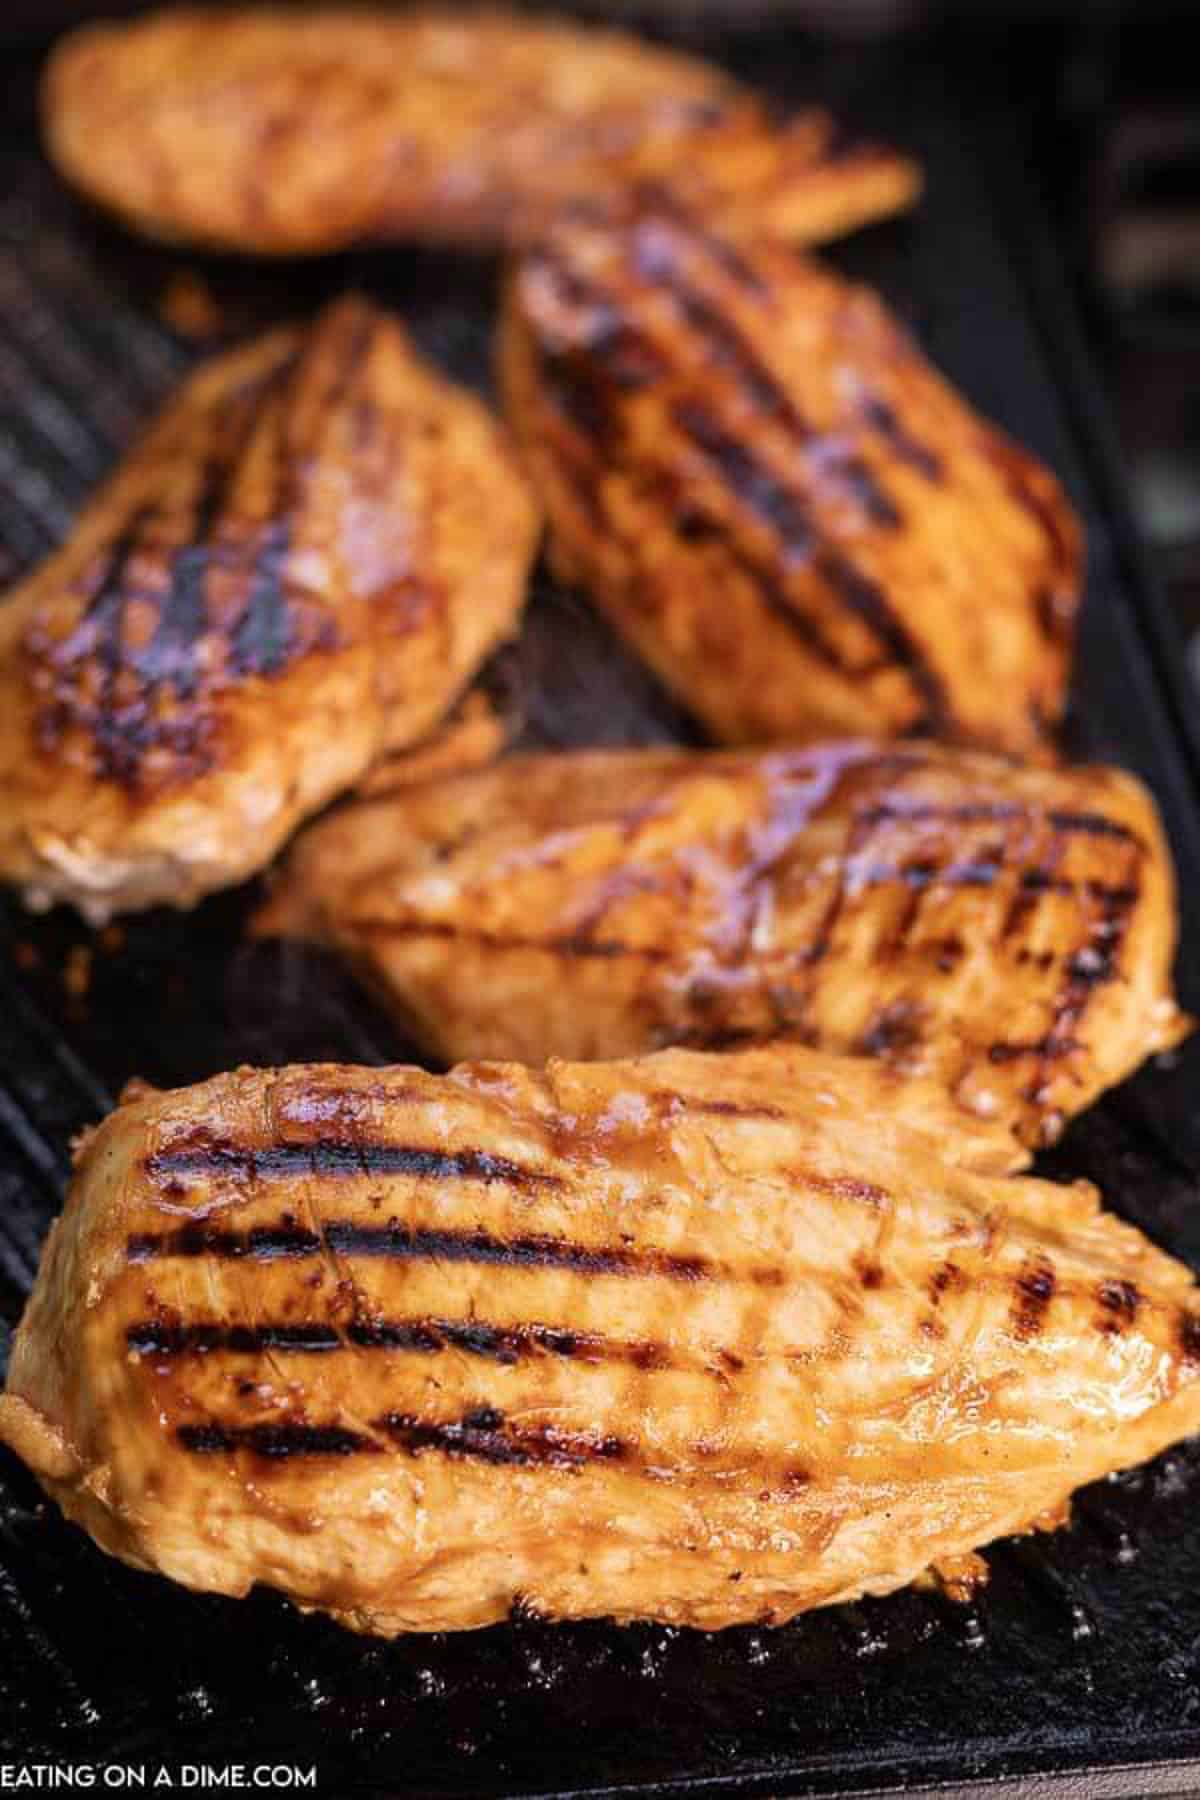 The marinaded chicken breasts cooking on a grill.  